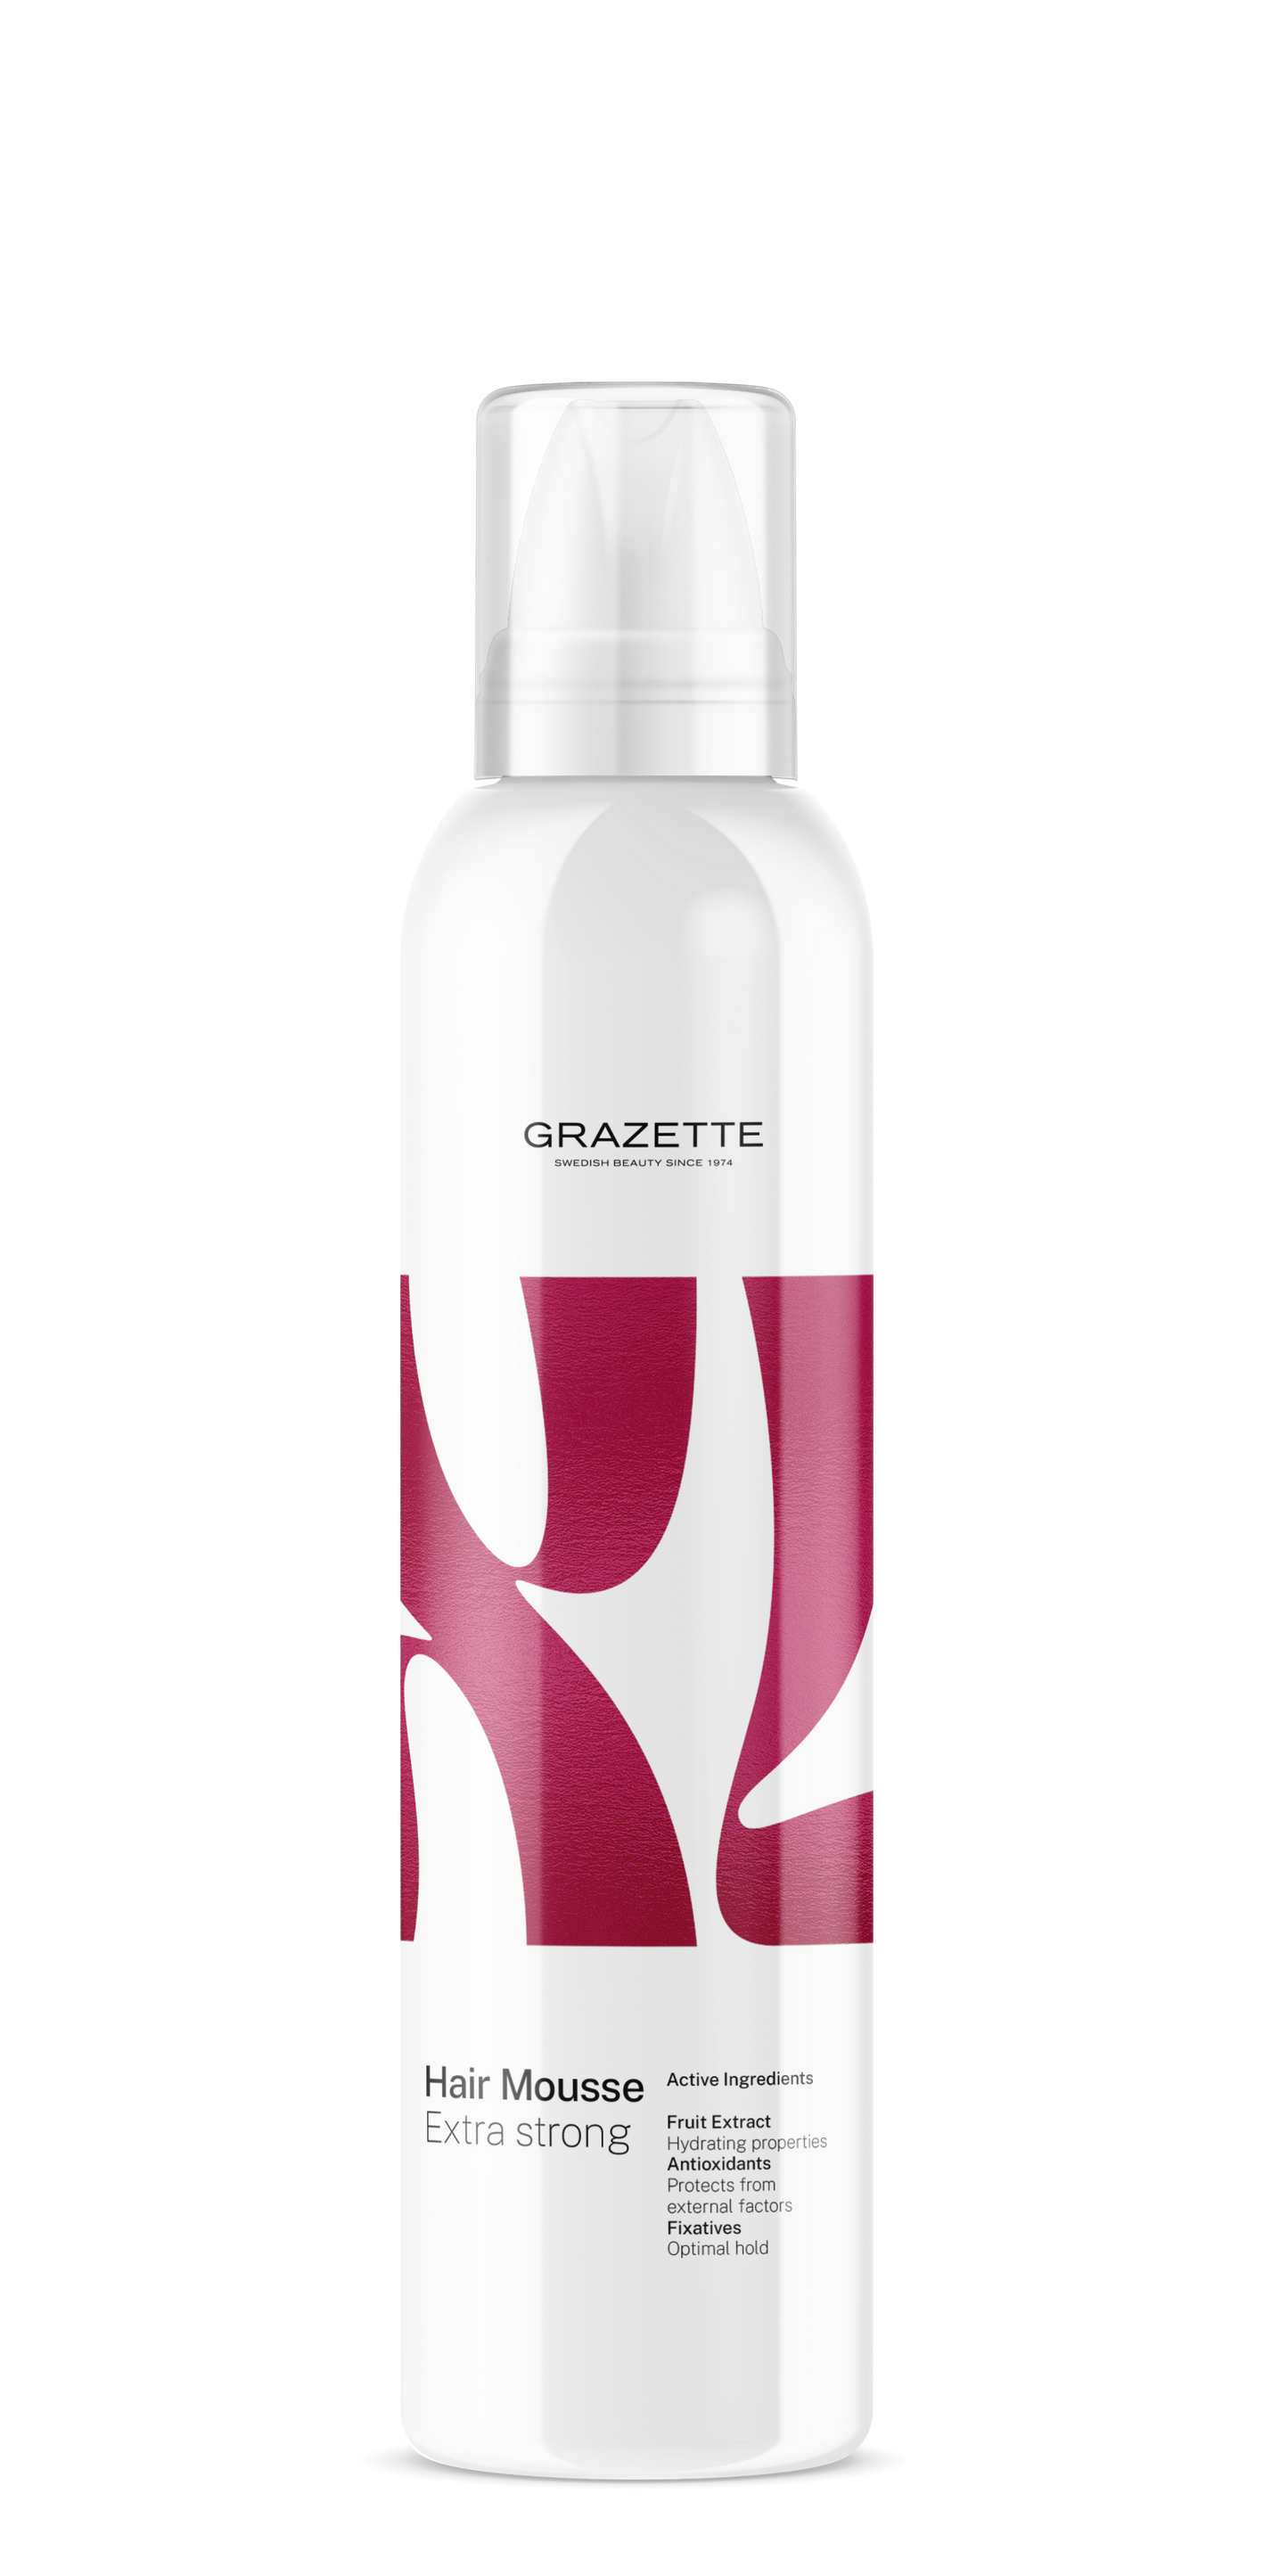 XL HAIR MOUSSE EXTRA STRONG 300ml